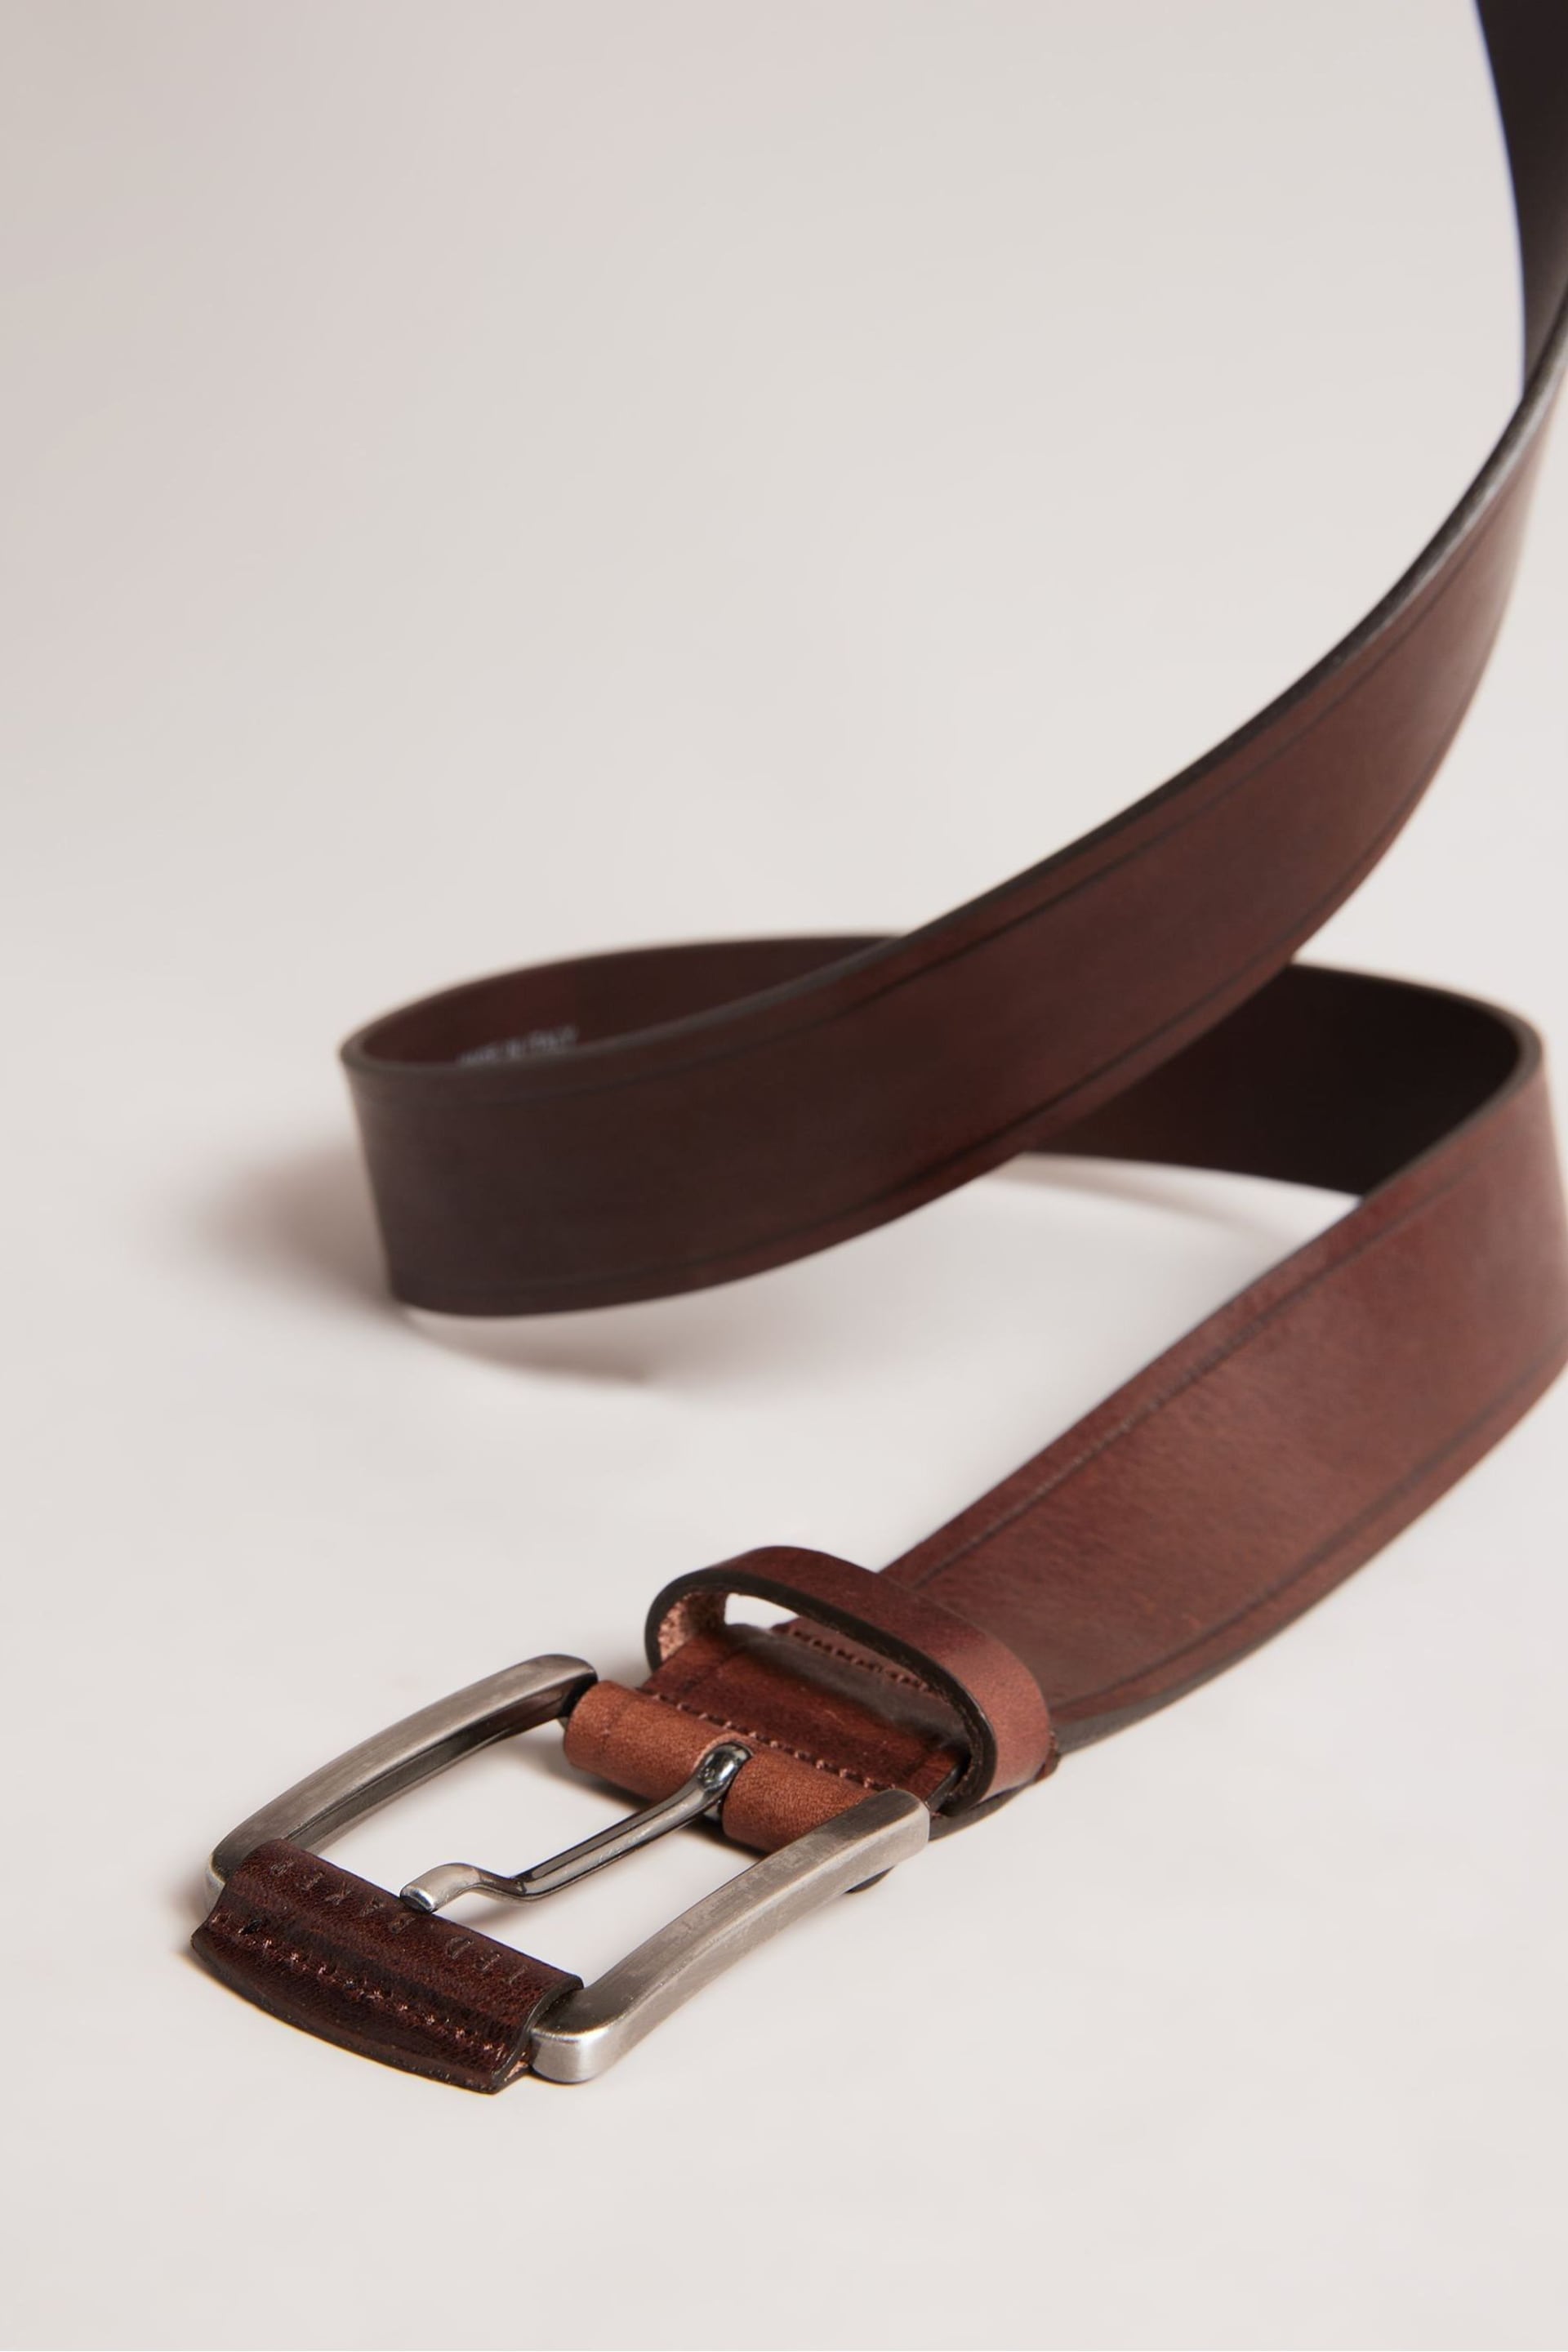 Ted Baker Brown Lined Embossed Leather Belt - Image 3 of 4